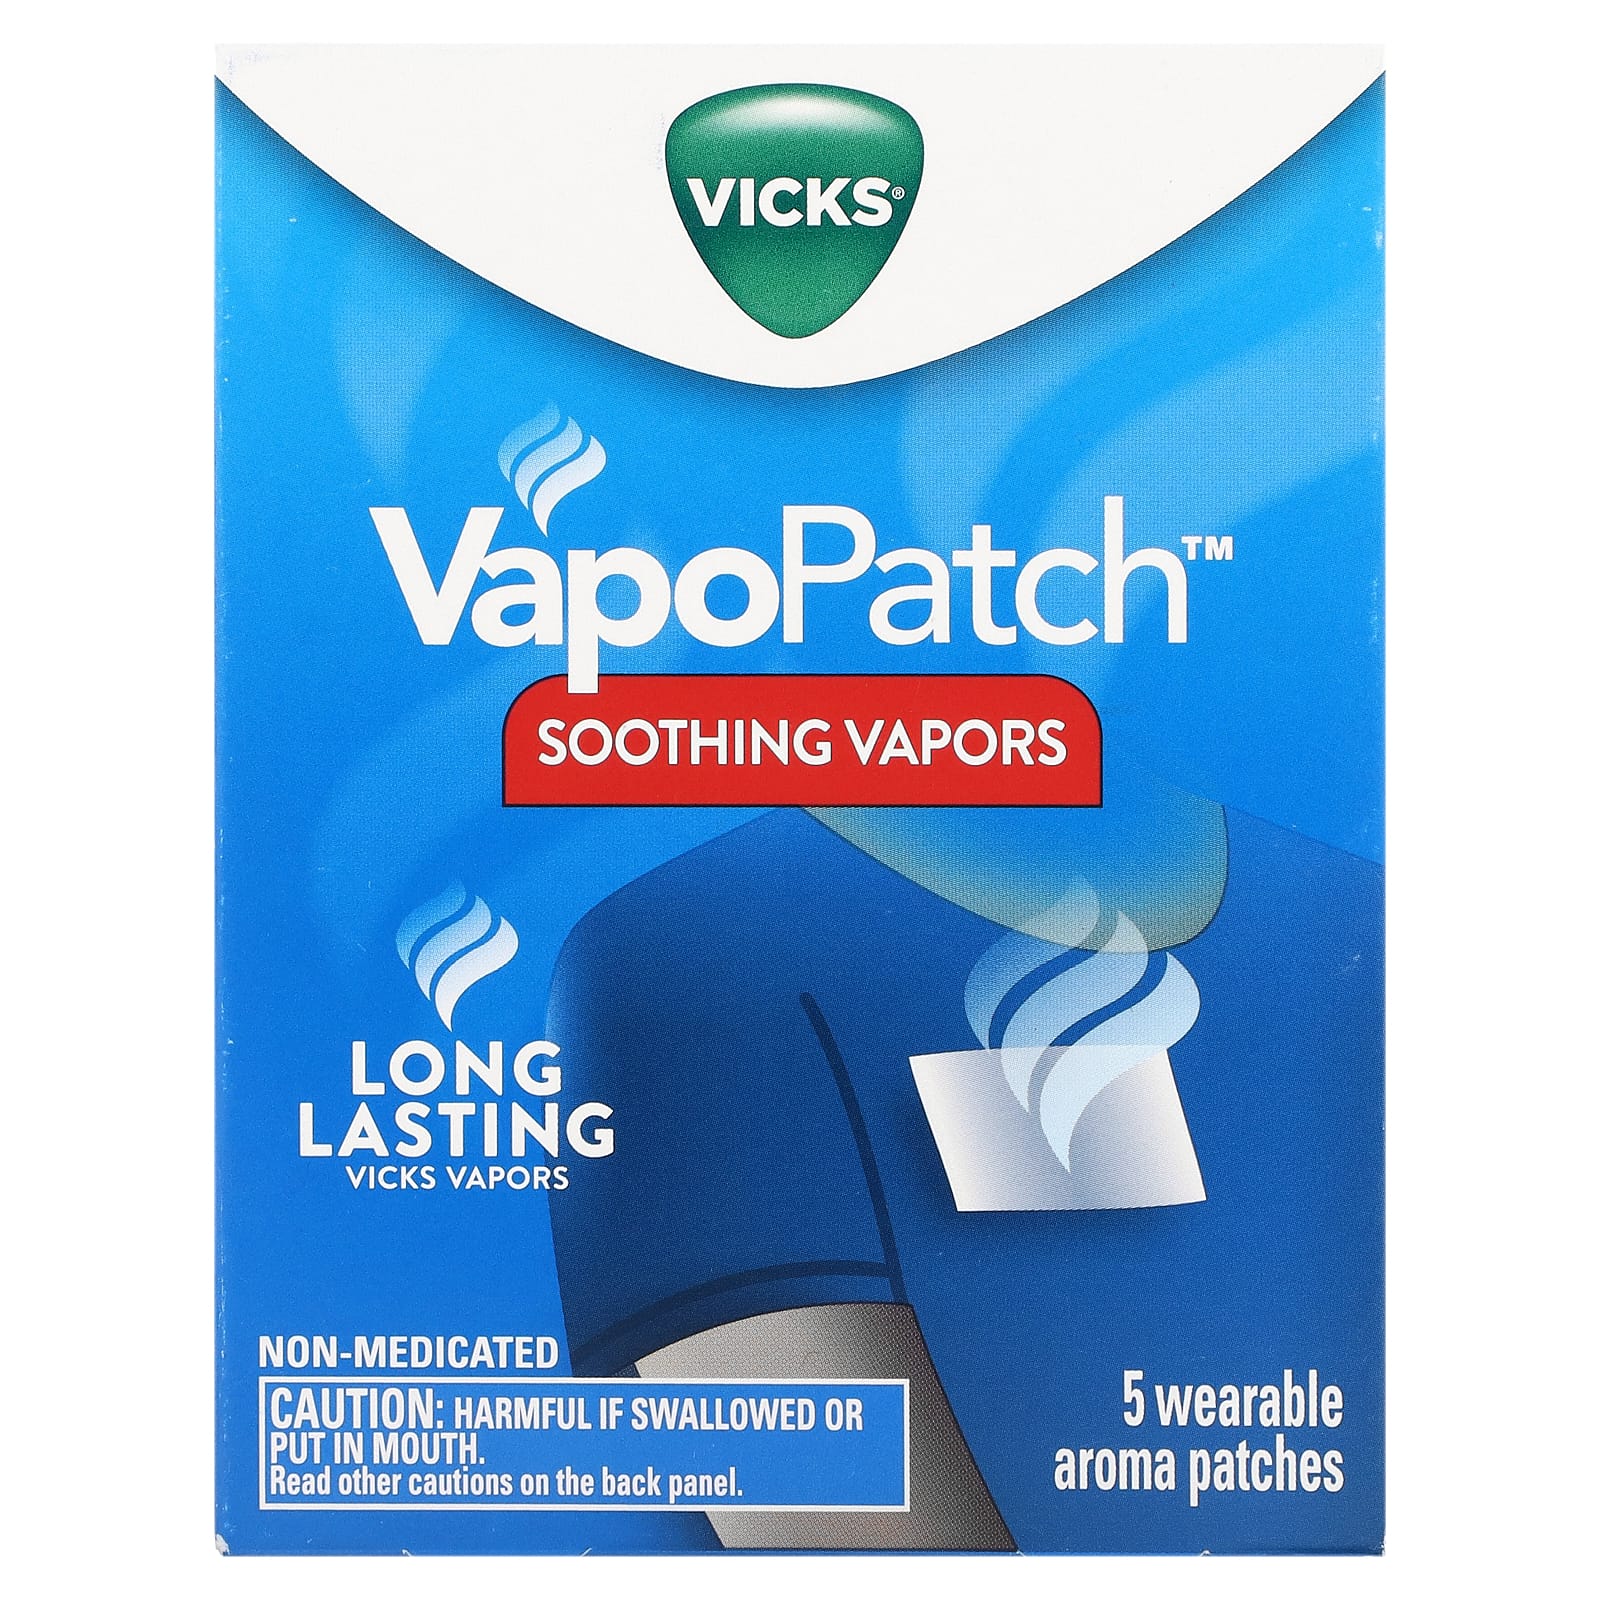 Патчи Vicks Soothing Vapors с ароматом, 5 патчей vicks vapopatch soothing vapors 5 патчей с ароматом для ношения